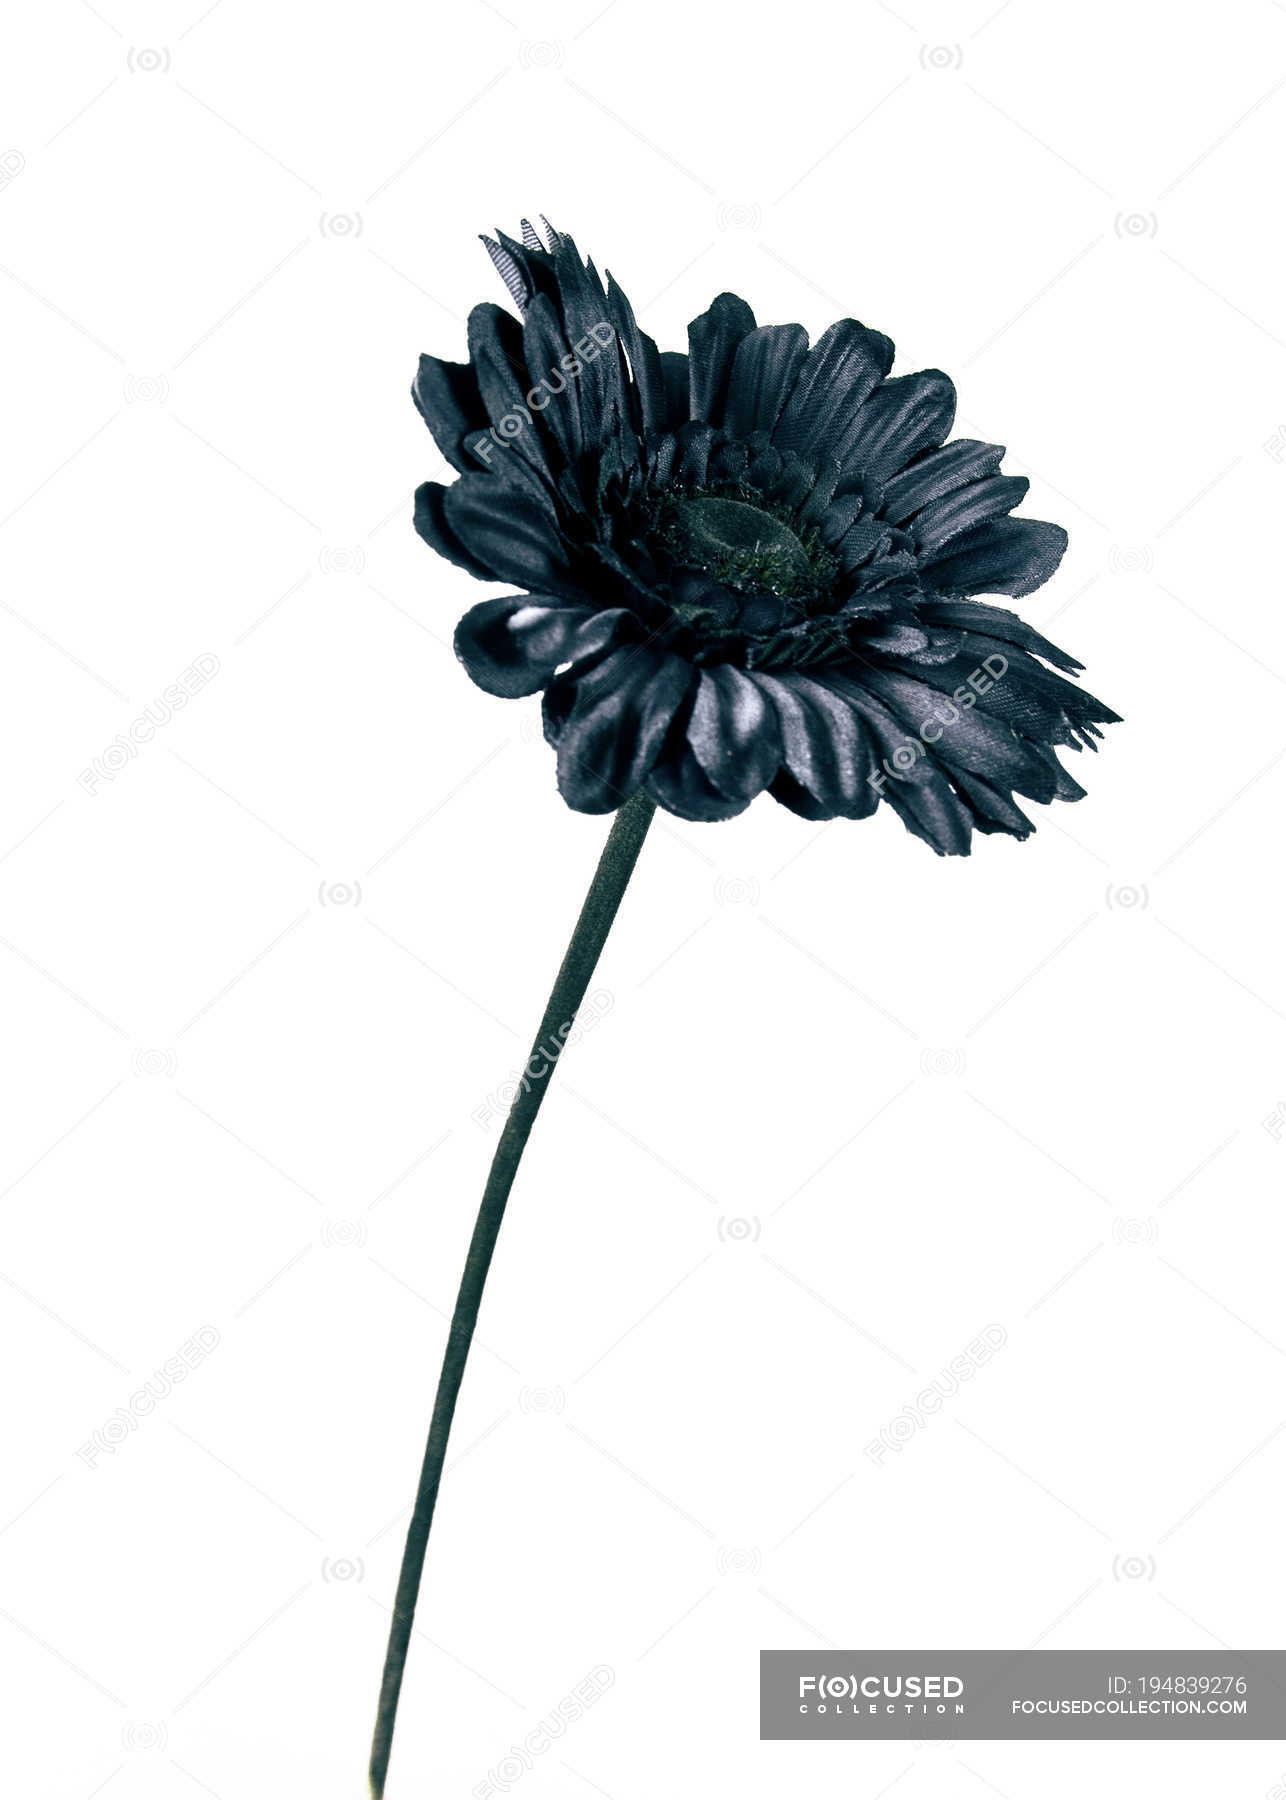 Close-up of black flower on white background — purity, plant - Stock Photo  | #194839276